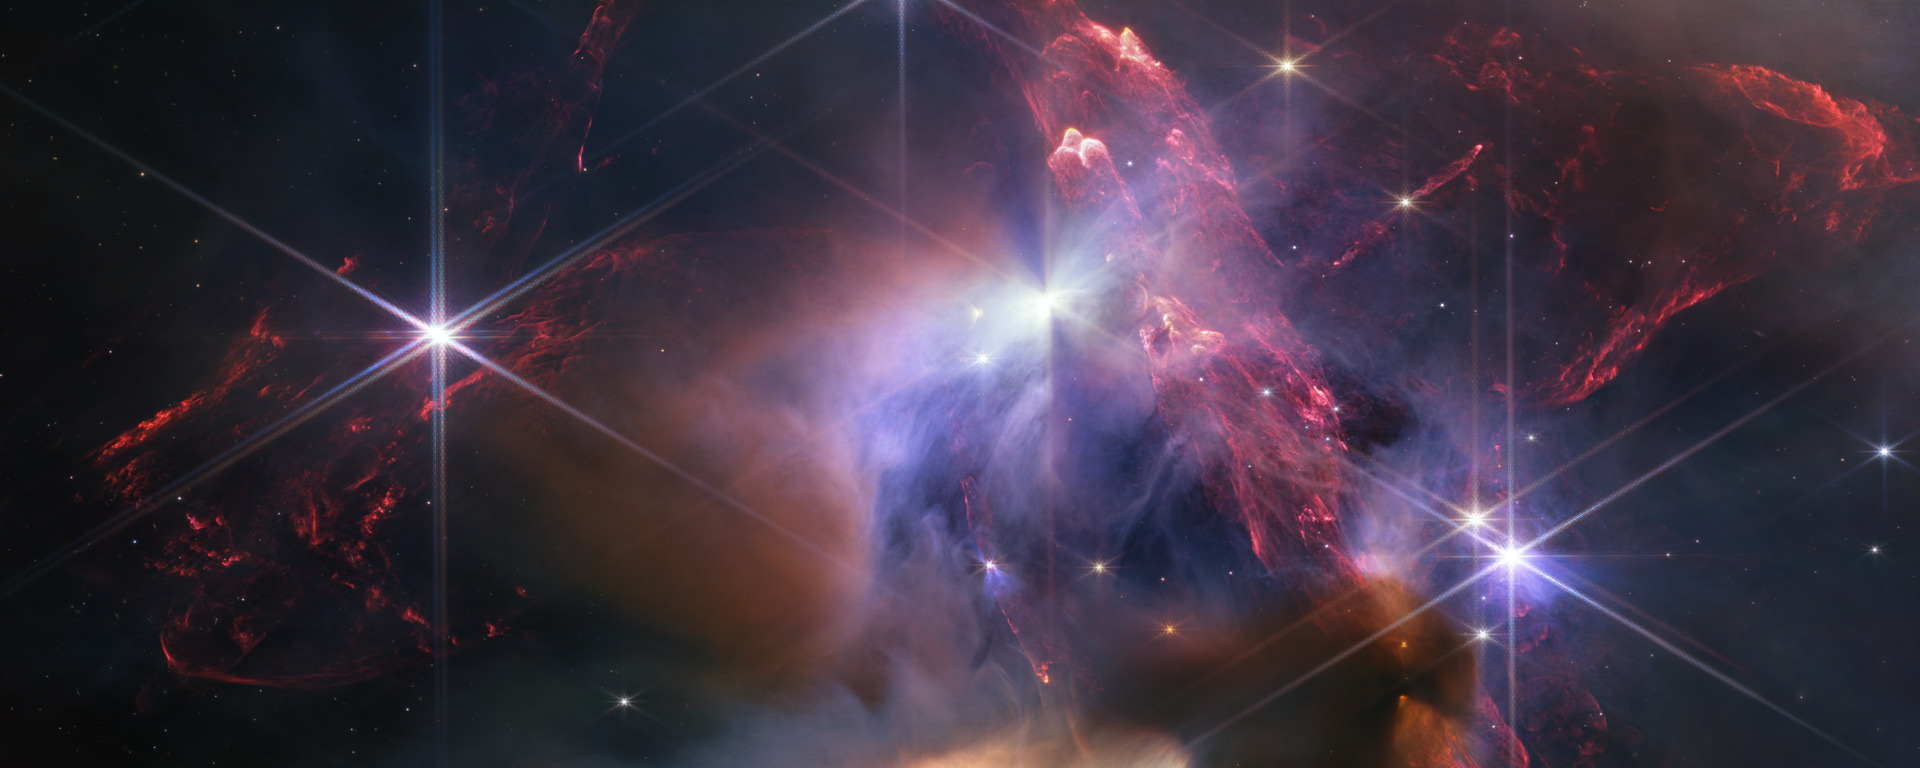 The first anniversary image from NASA’s James Webb Space Telescope displays star birth like it’s never been seen before, full of detailed, impressionistic texture. The subject is the Rho Ophiuchi cloud complex, the closest star-forming region to Earth.  - Sputnik International, 1920, 28.11.2023